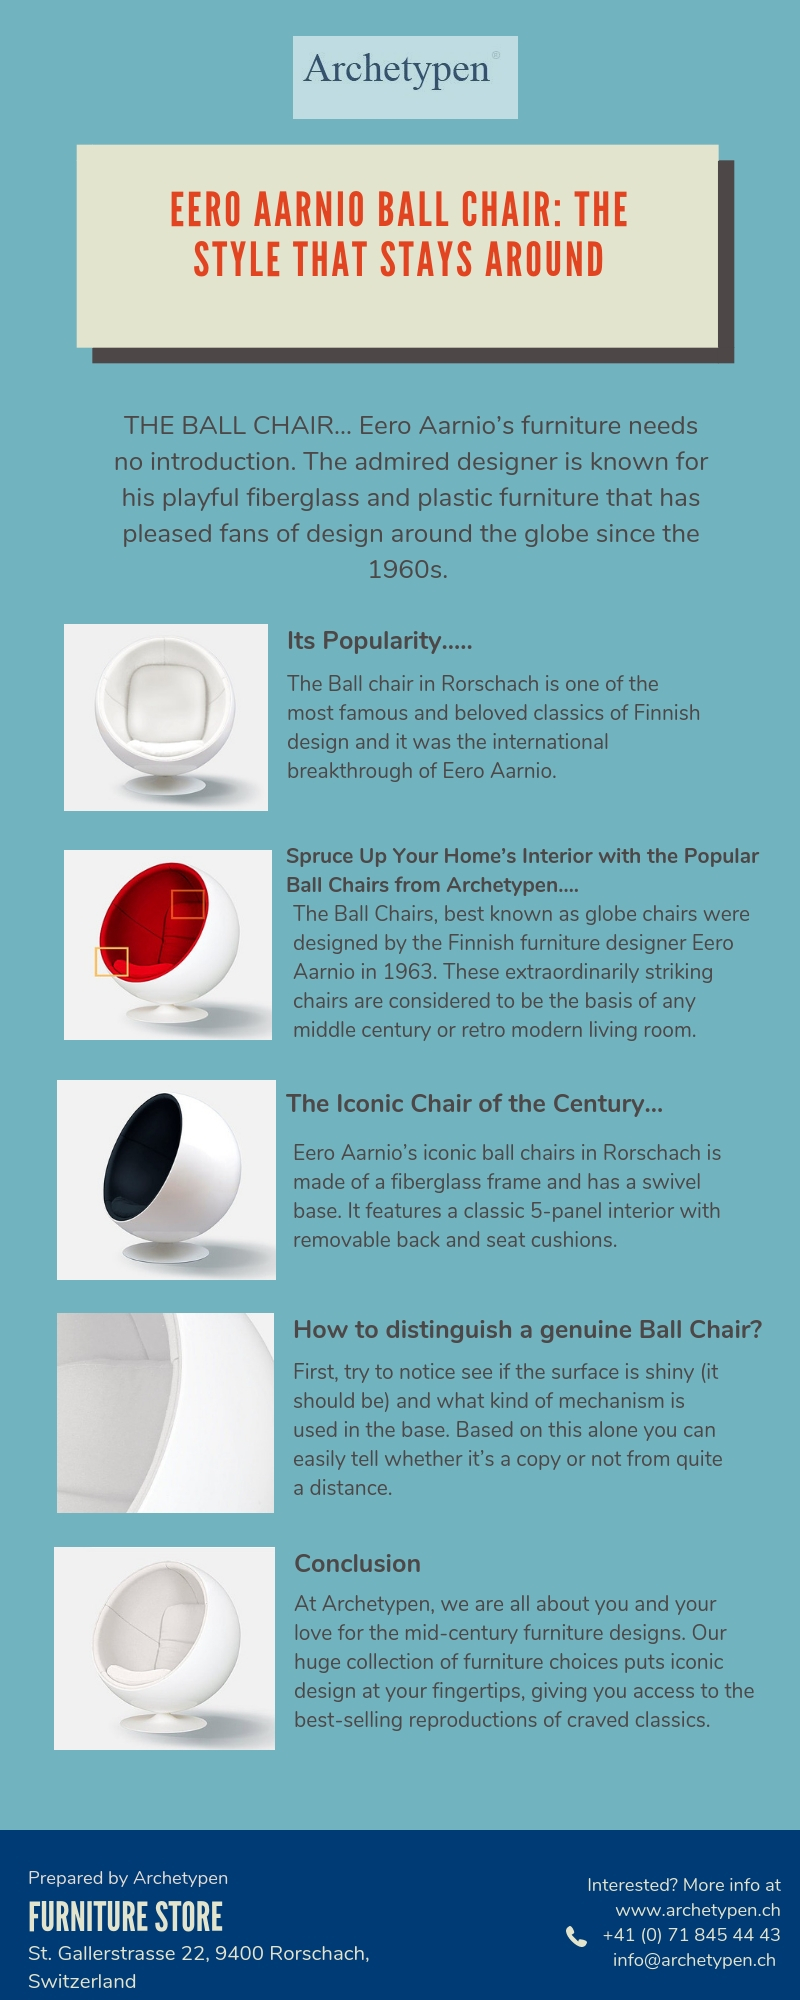 Eero Aarnio Ball Chair: The Style that Stays Around The ball chair is one of the most famous and beloved classics of Finnish design that rose into popularity because of its unconventional shape. Know all about this iconic chair of the 20th century here….
https://www.evernote.com/shard/s688/sh/7b6a43f2-a00 by archetypen